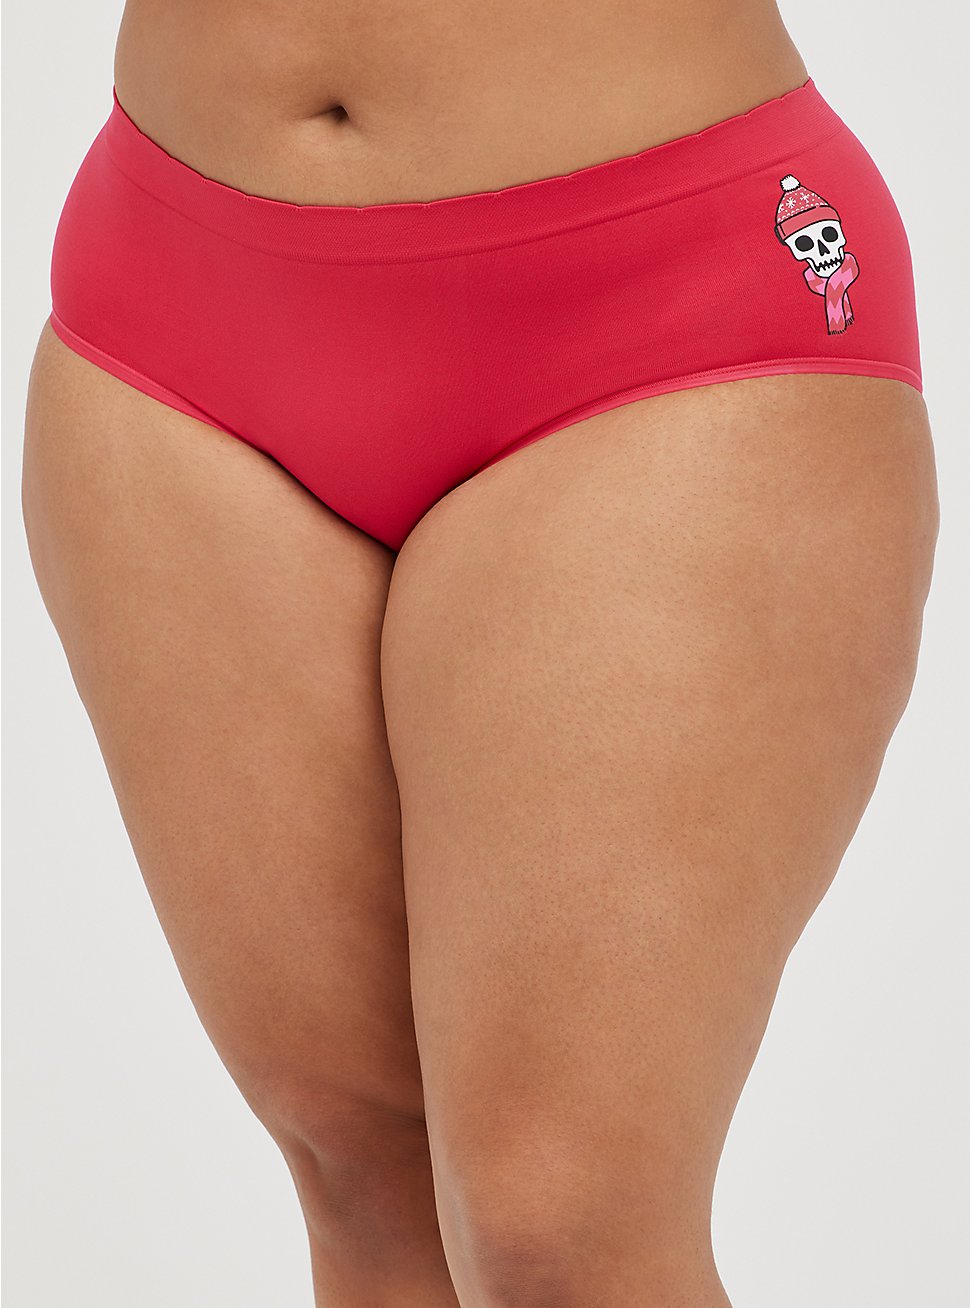 Plus Size Seamless Cheeky Panty - So Freakin Cold Skull Pink, FREAKING COLD, hi-res